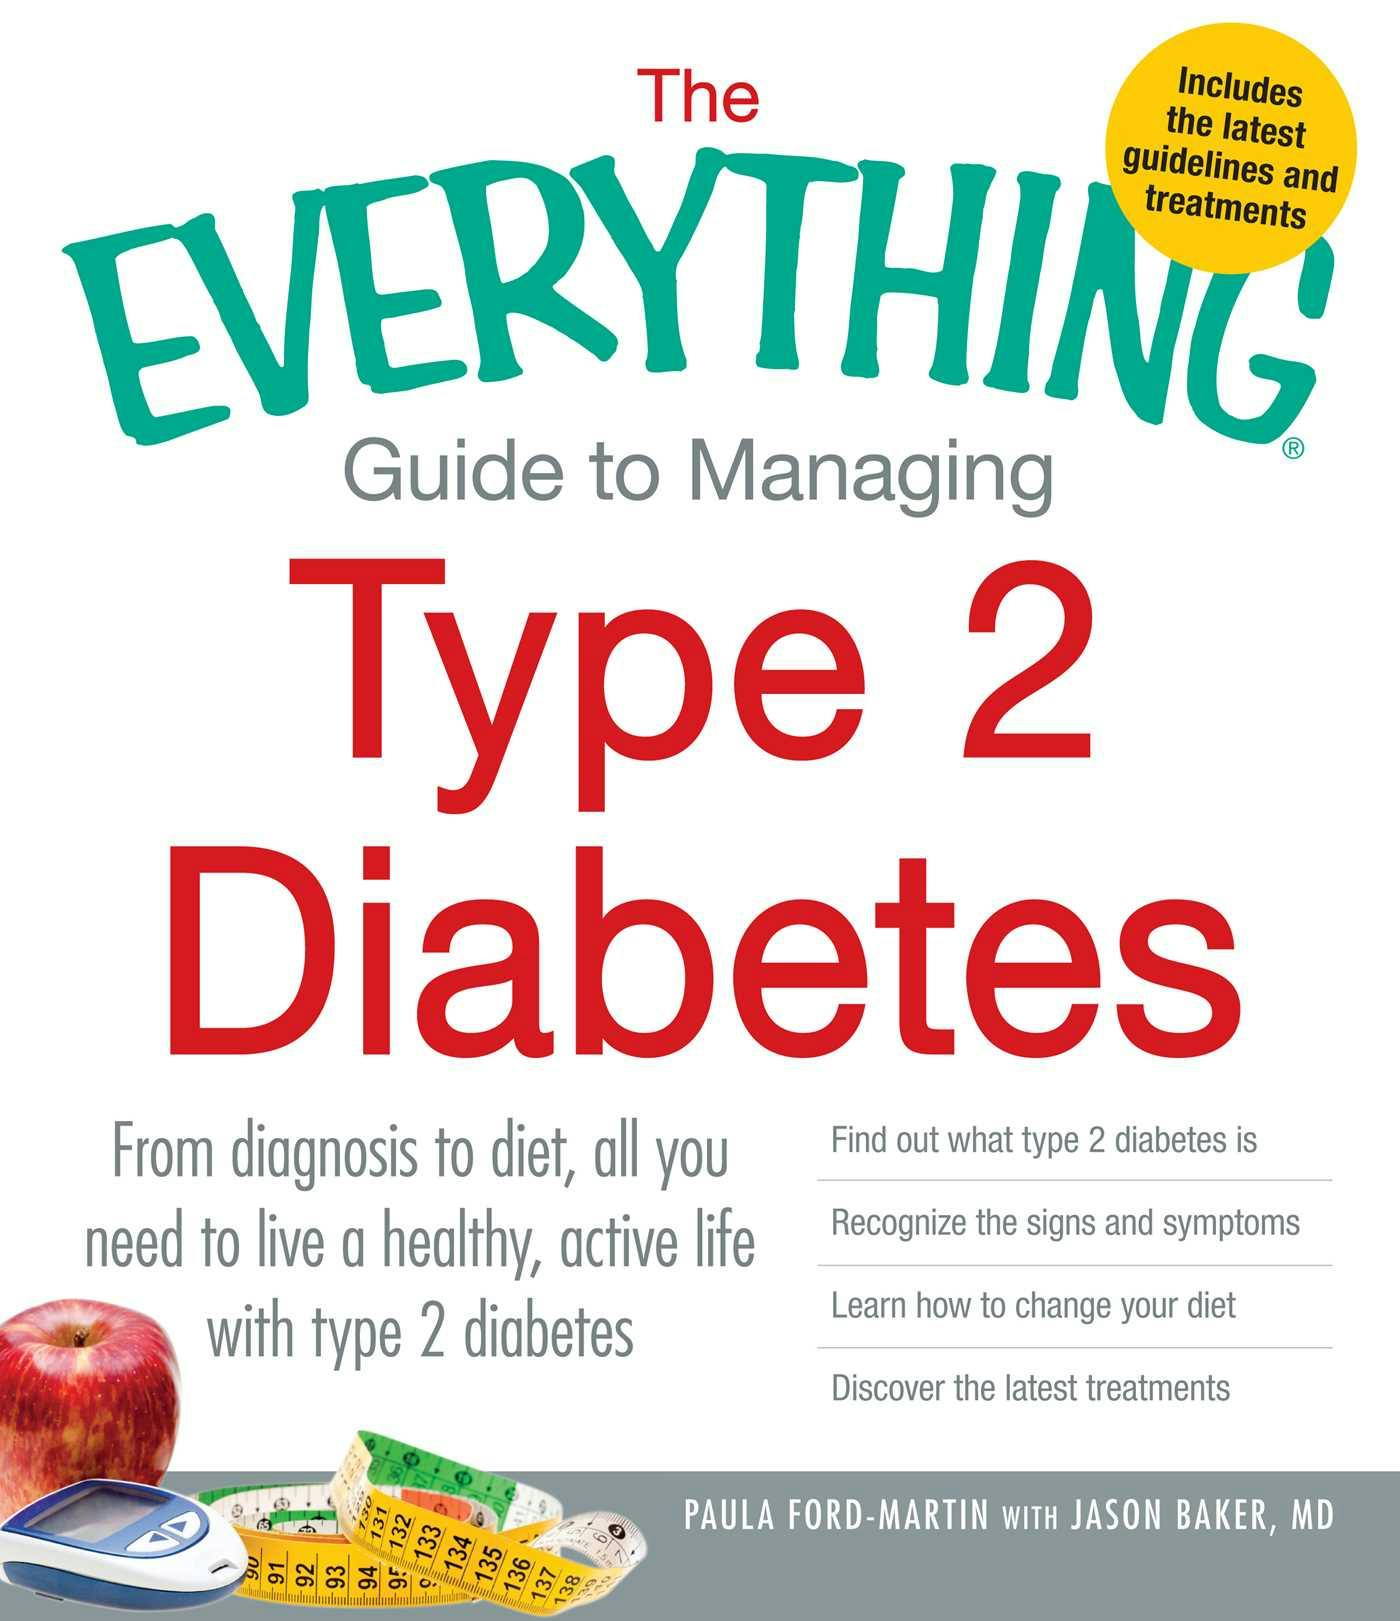 The Everything Guide to Managing Type 2 Diabetes: From Diagnosis to Diet, All You Need to Live a Healthy, Active Life with Type 2 Diabetes - Find Out What Type 2 Diabetes Is, Recognize the Signs and Symptoms, Learn How to Change Your Diet and Discover the Latest Treatments - undefined